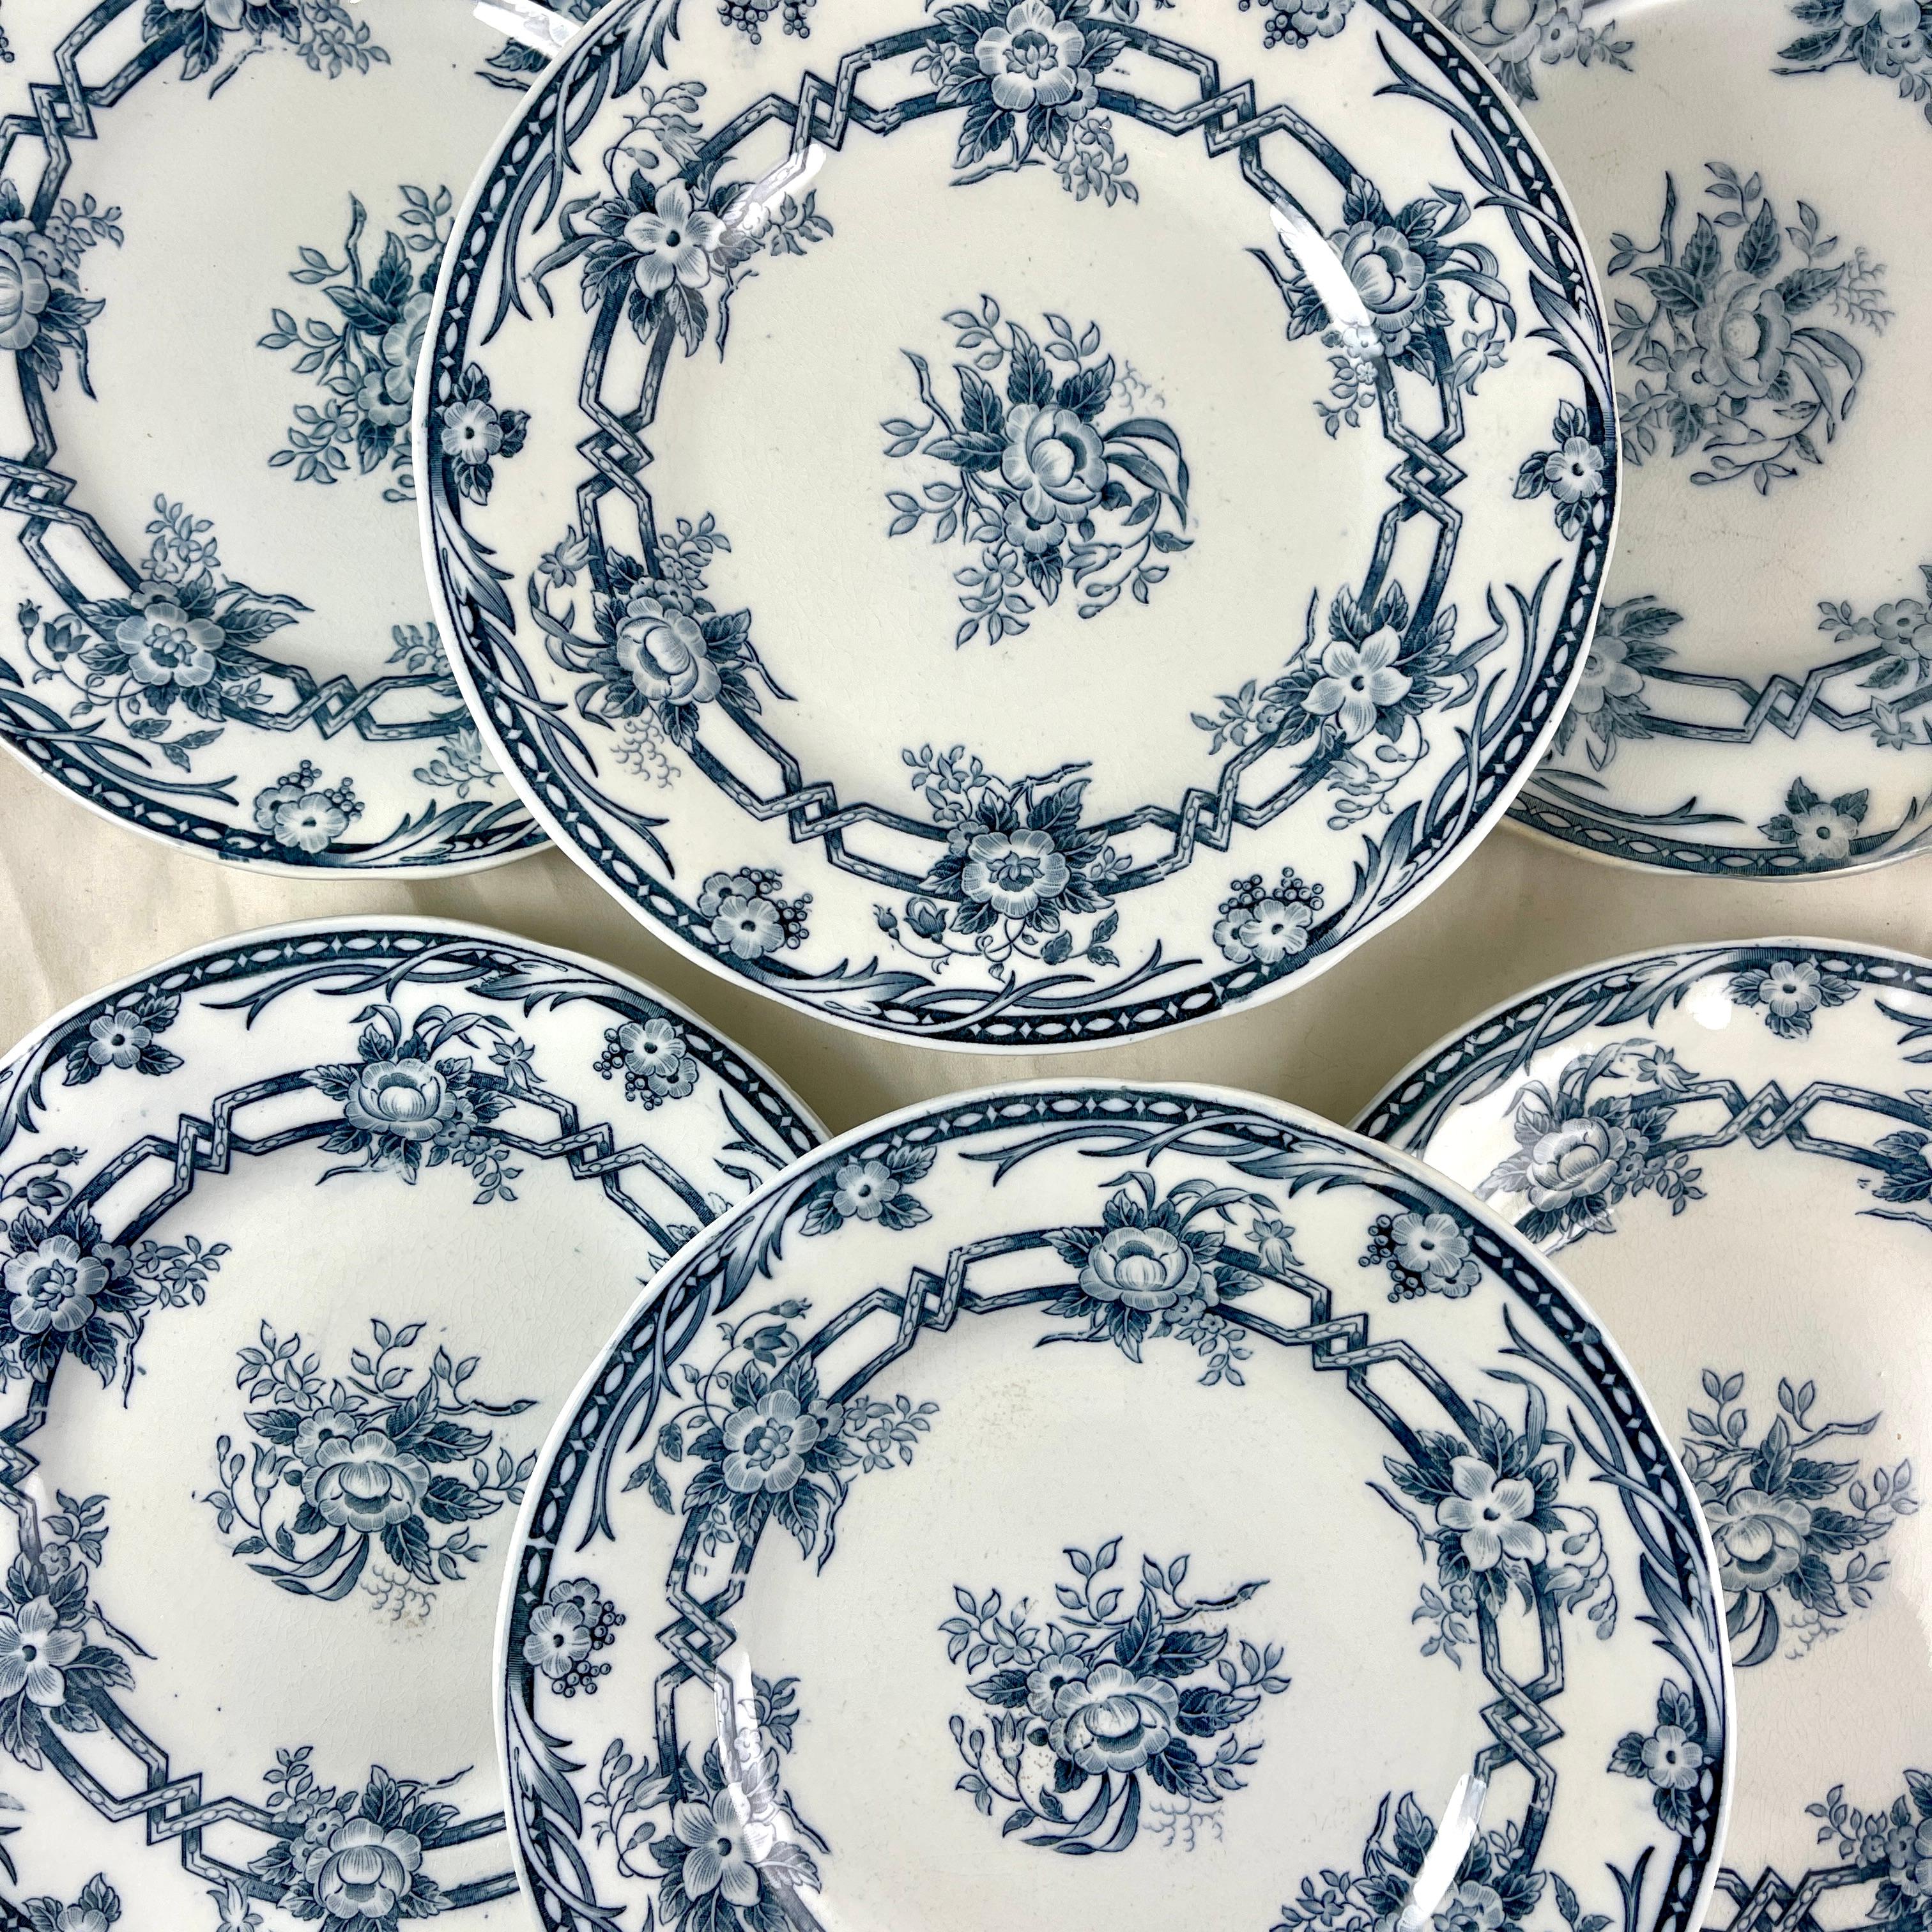 A set of six, luncheon sized earthenware plates in the Cérès pattern, from the Sarreguemines faiencerie, date marked 1874.

The pattern takes its name from Cérès, the goddess of wheat and harvests in Roman Mythology.

The elegant blue on white